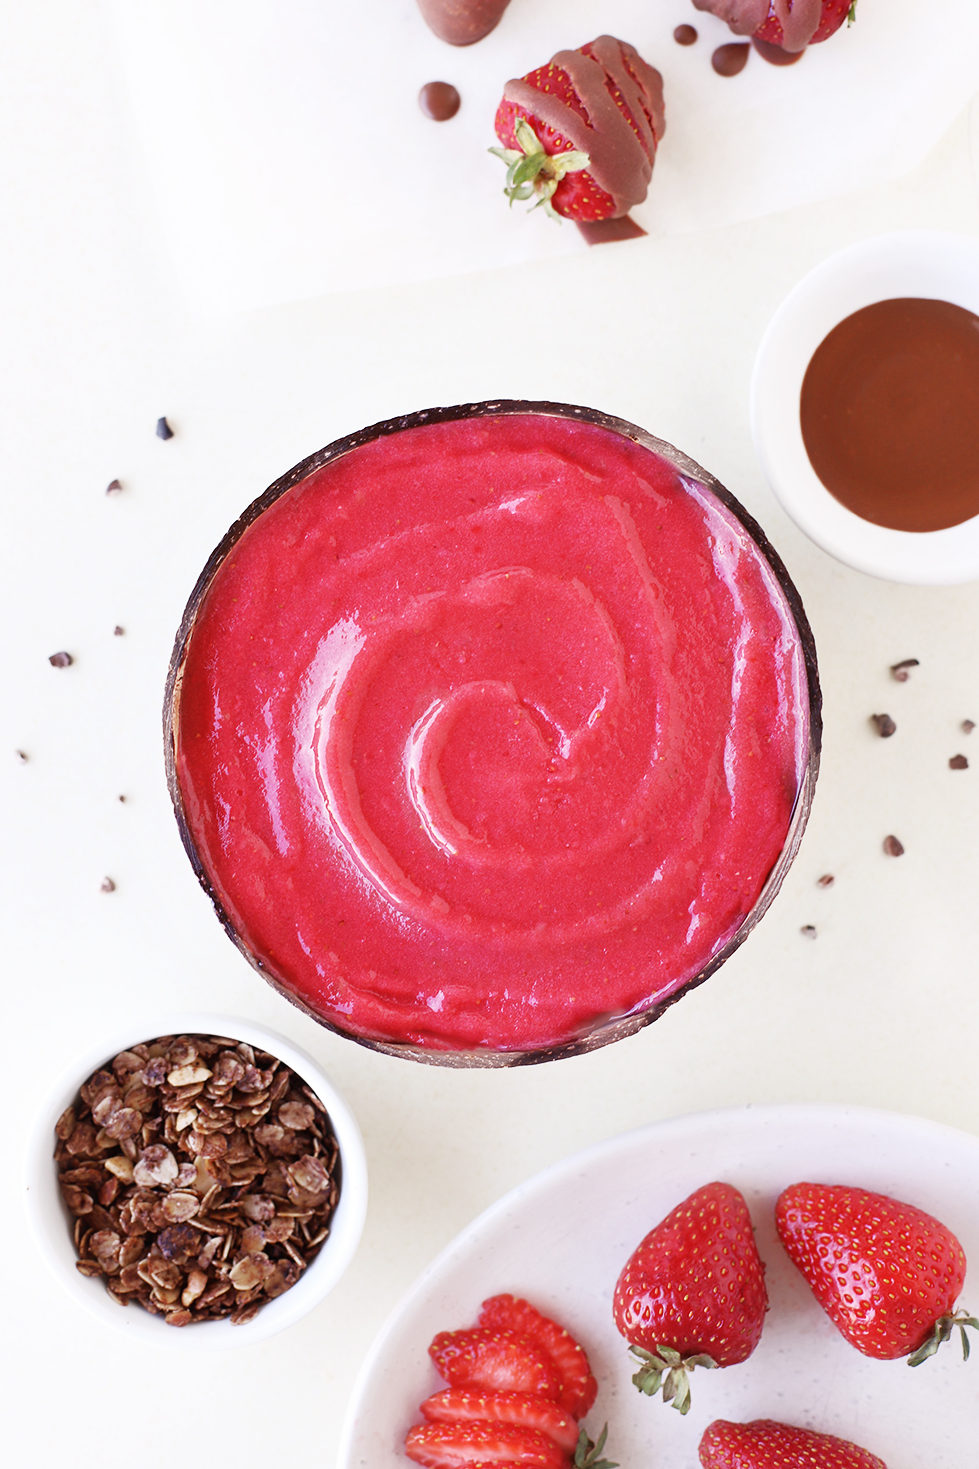 Healthy strawberry smoothie bowl with chocolate sauce, granola and strawberries in a sustainable coconut bowl food styling and photography